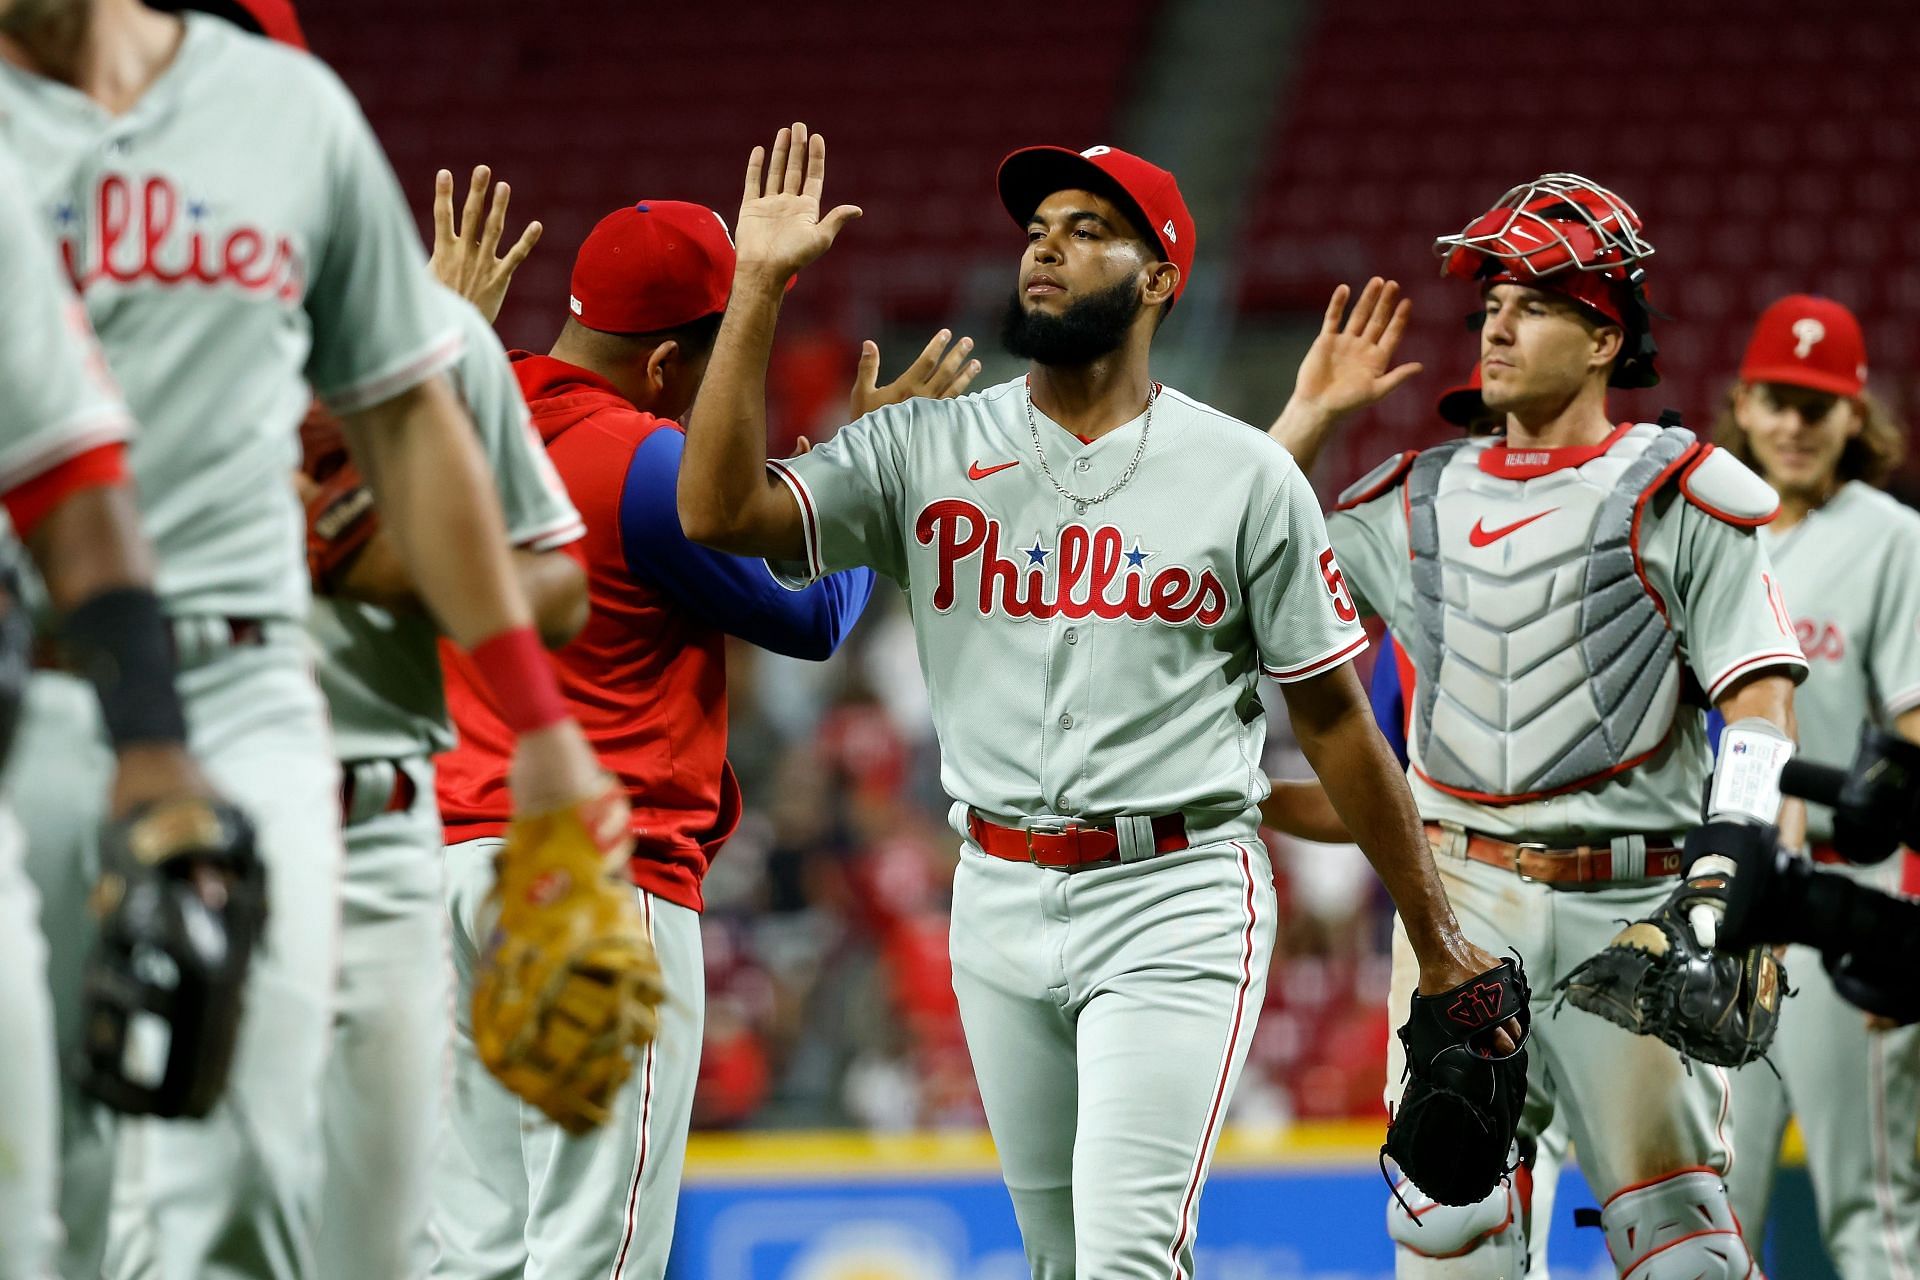 The Phillies celebrating a win over the Reds